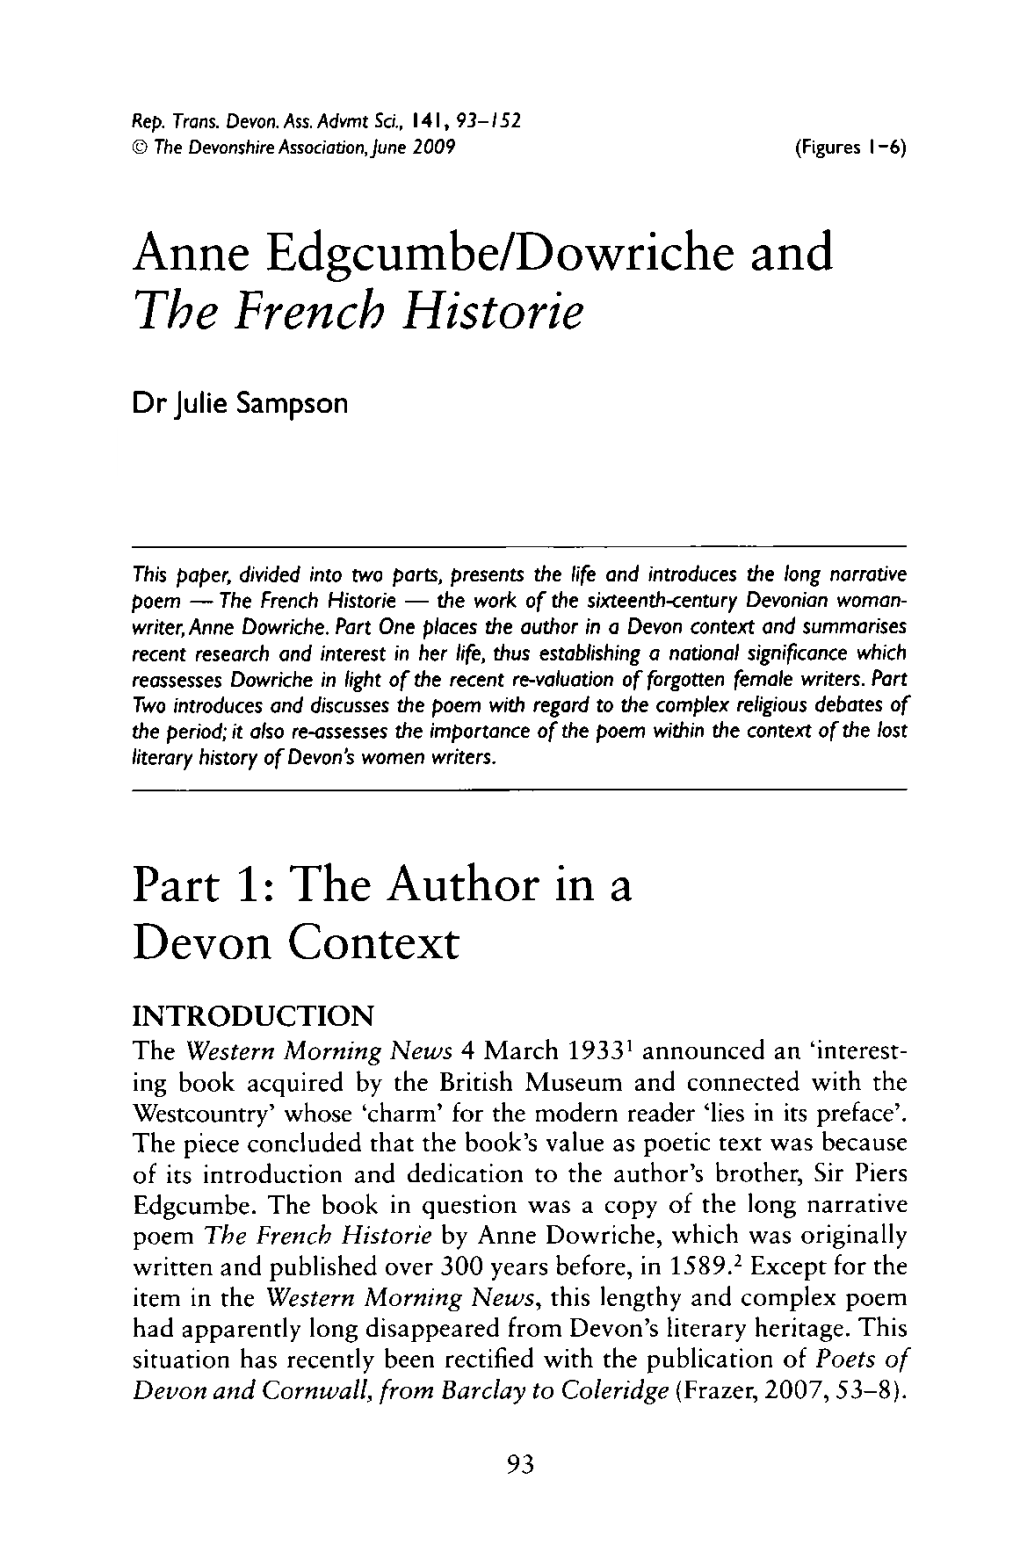 Anne Edgcumbe/Dowriche and the French Historie